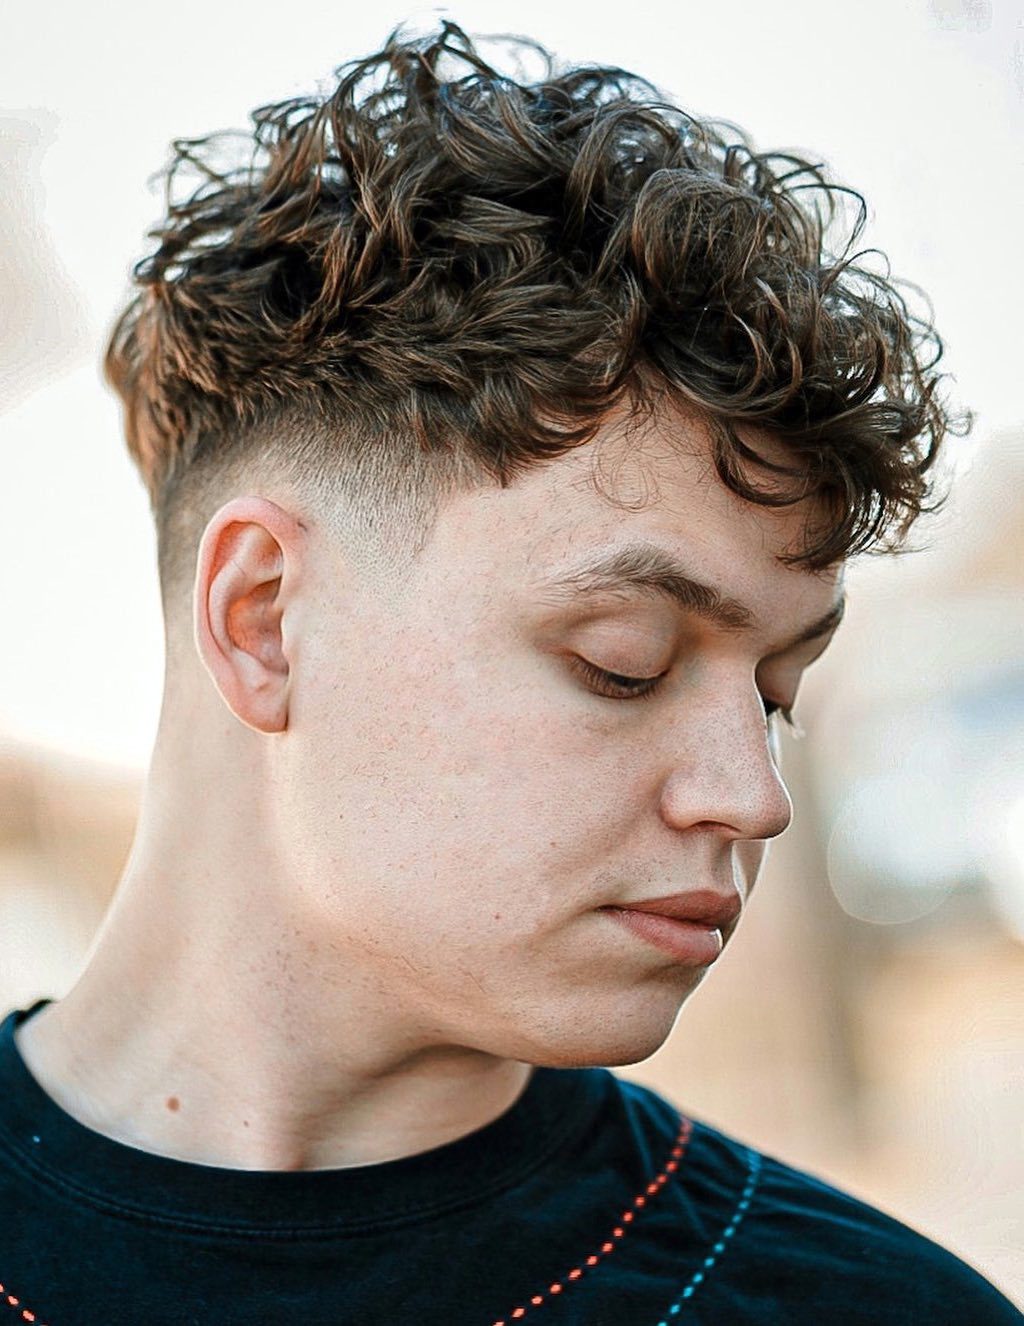 Fluffy Curls with Low Fade